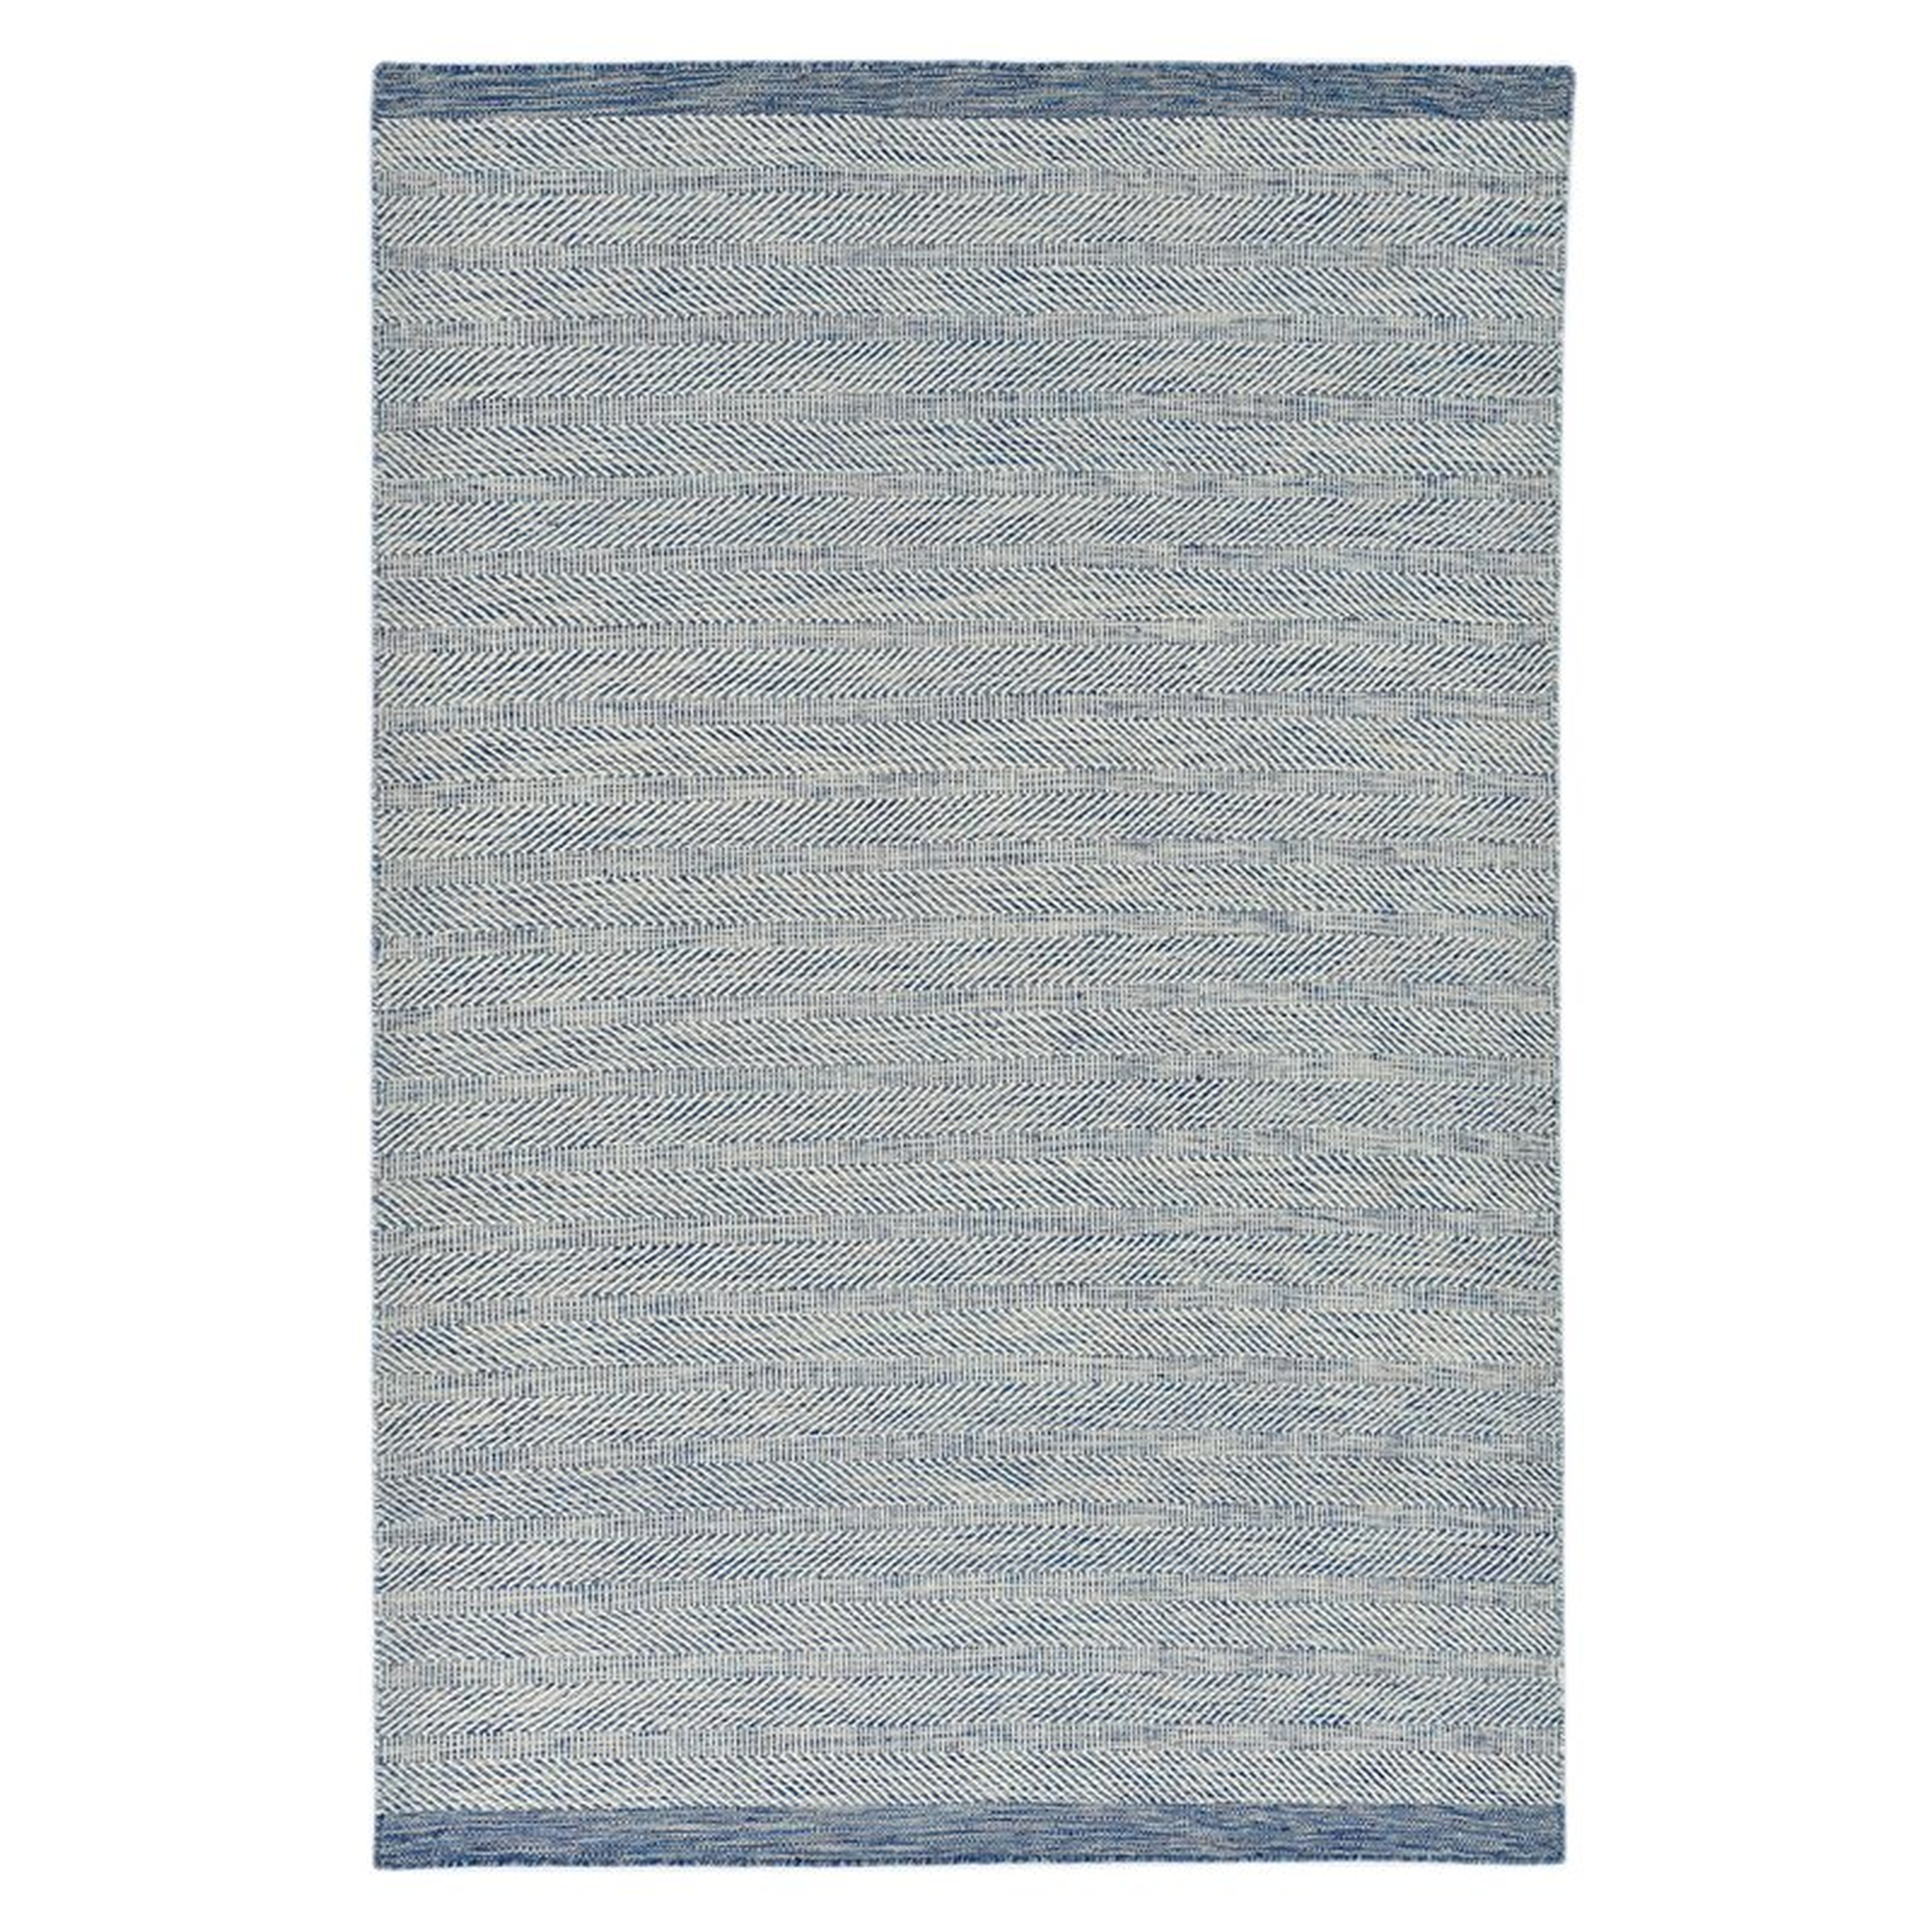 Solo Rugs Solo Rugs Isabella Hand Woven Wool Area Rug, Blue, 10 x 14 Rug Size: Rectangle 8' x 10' - Perigold